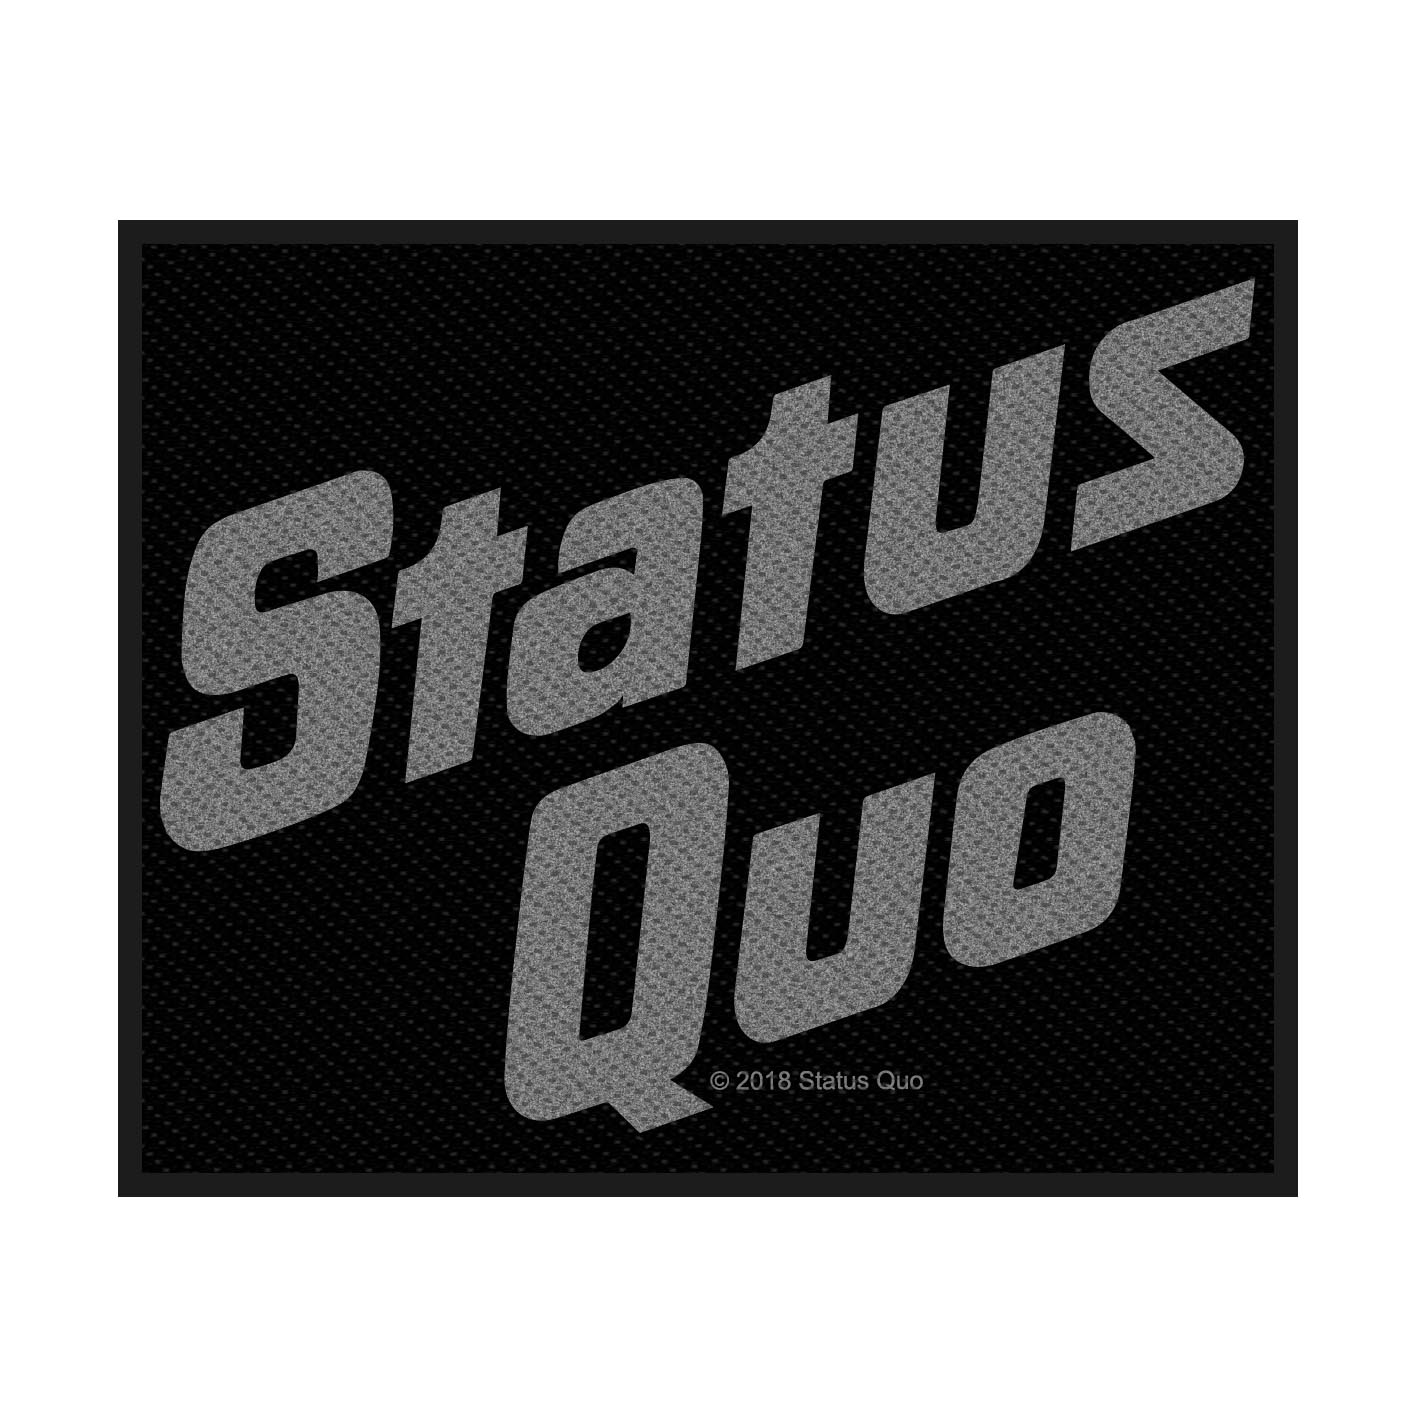 STATUS QUO /"LOGO/" WOVEN SEW ON PATCH